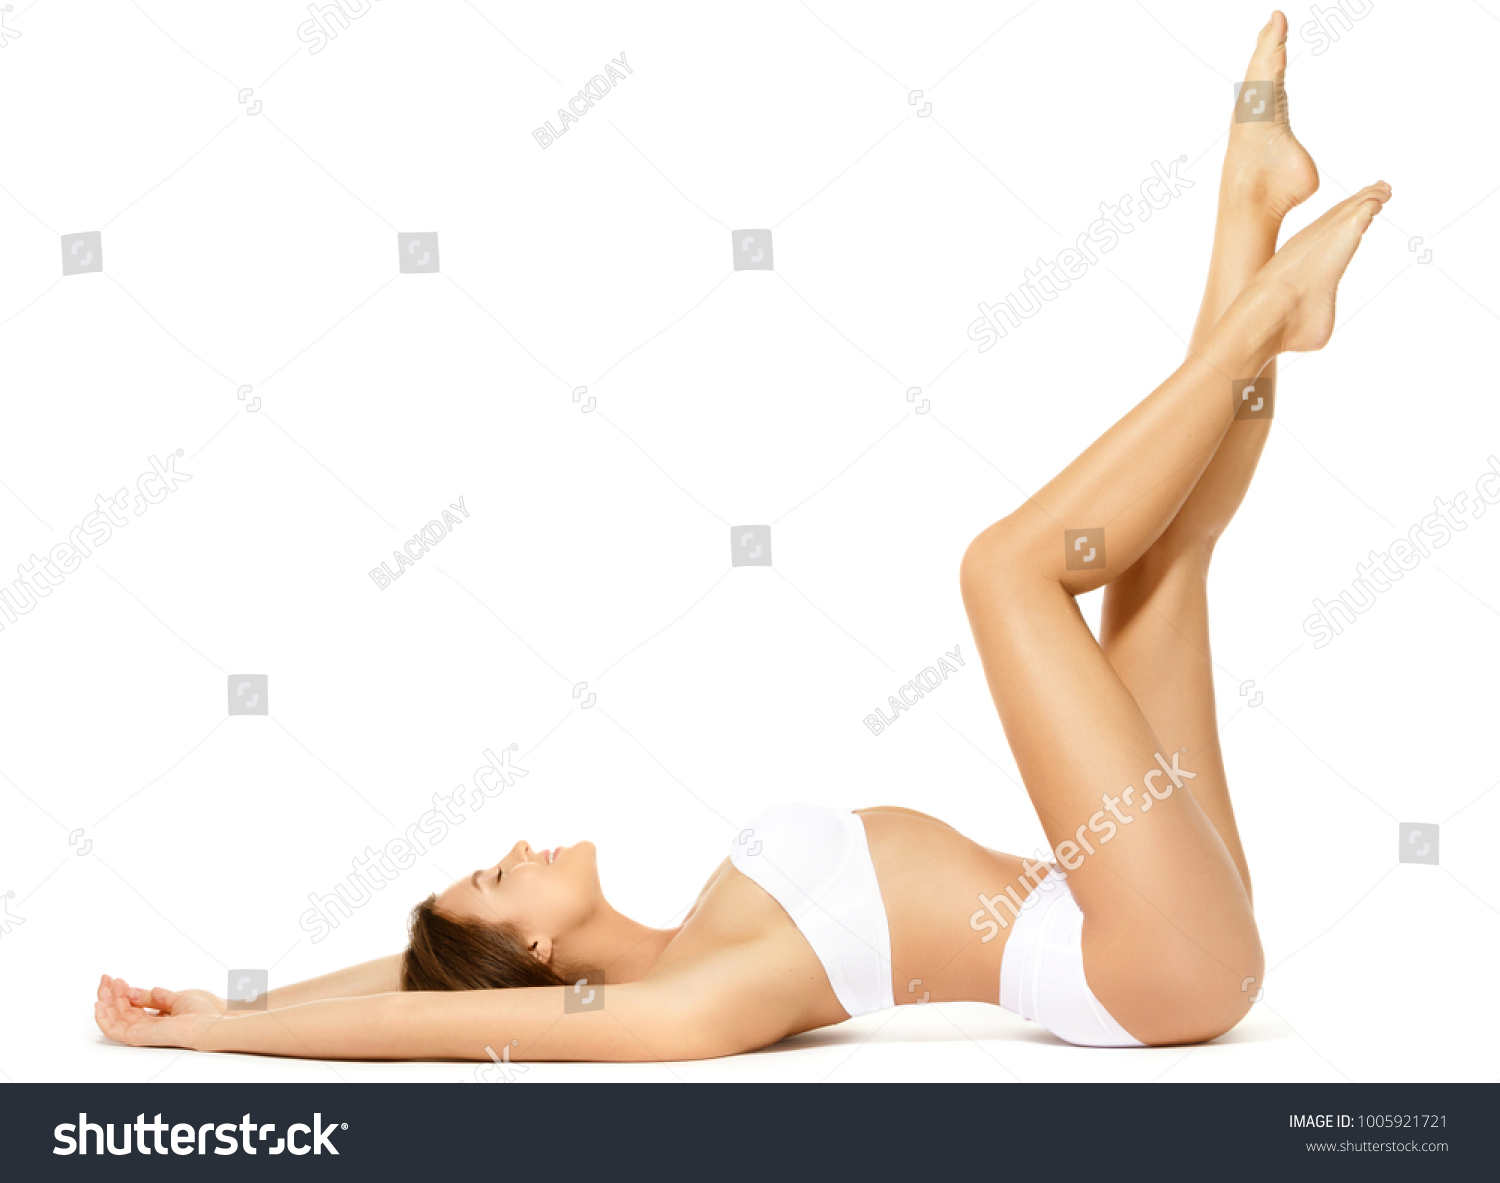 Woman with a beautiful long legs isolated on white background #1005921721